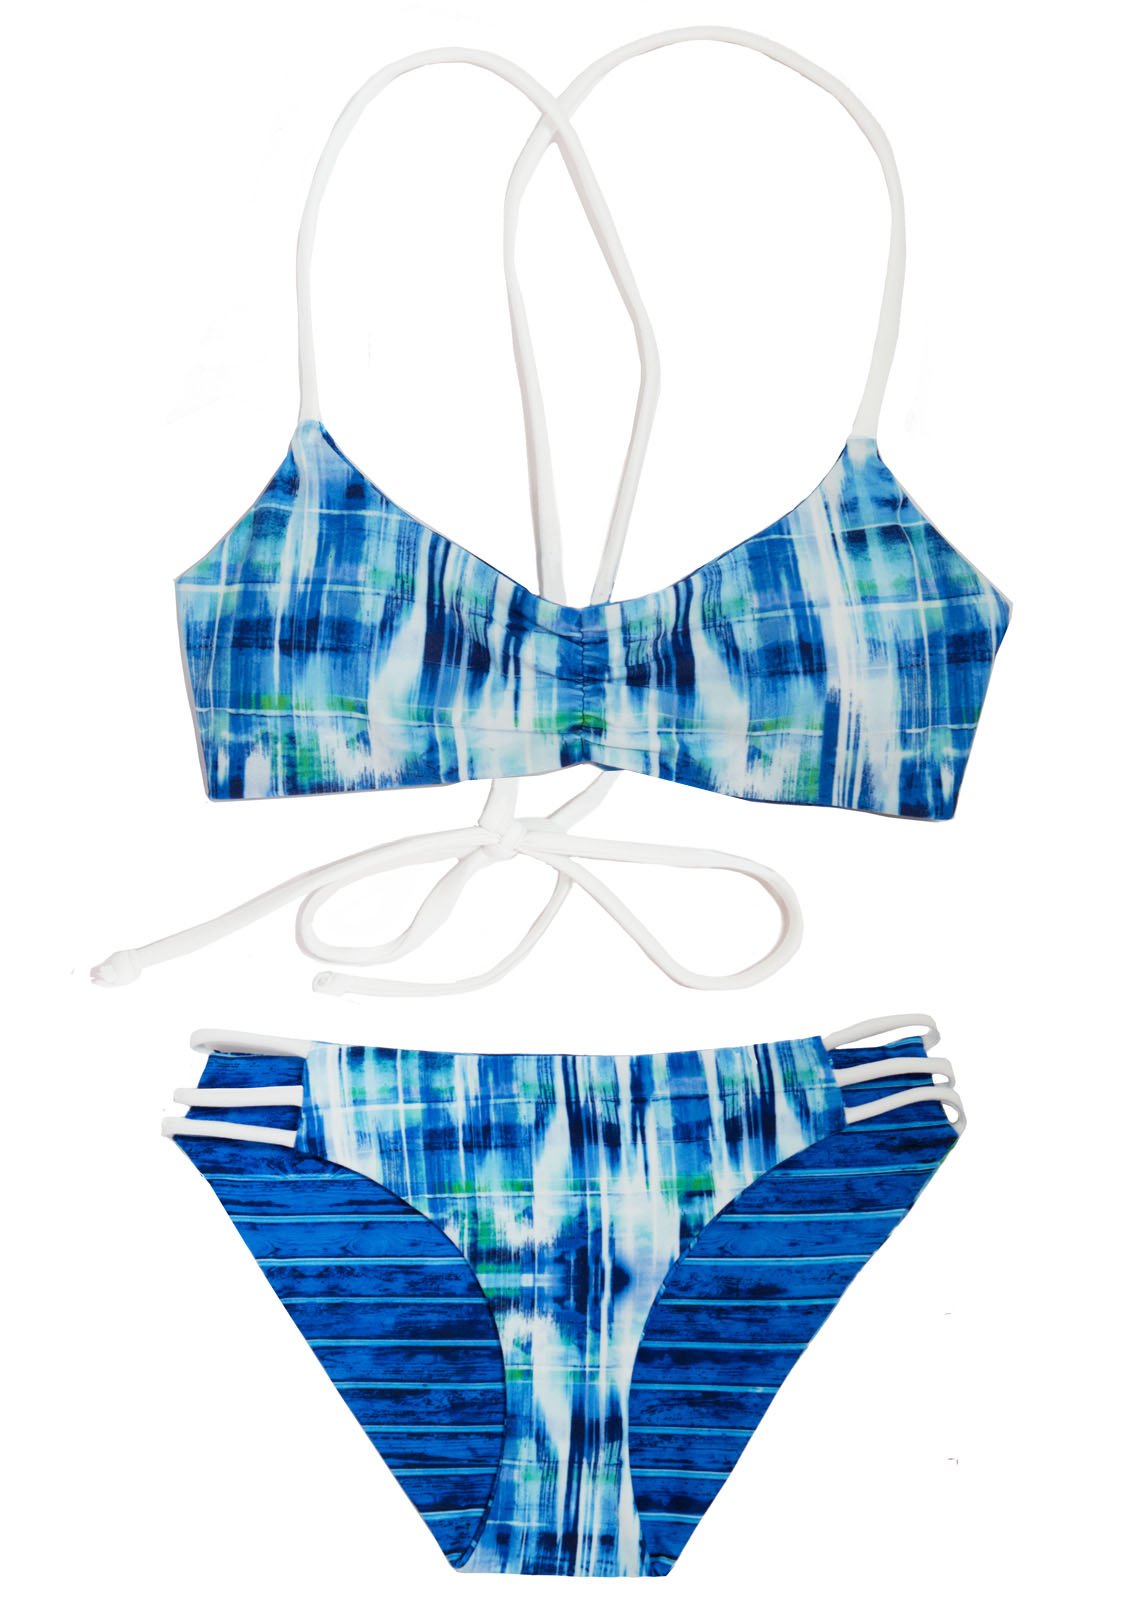 Reversible 2-Piece Junior Girls Swimsuit Blue Green White Stripes and Plaid